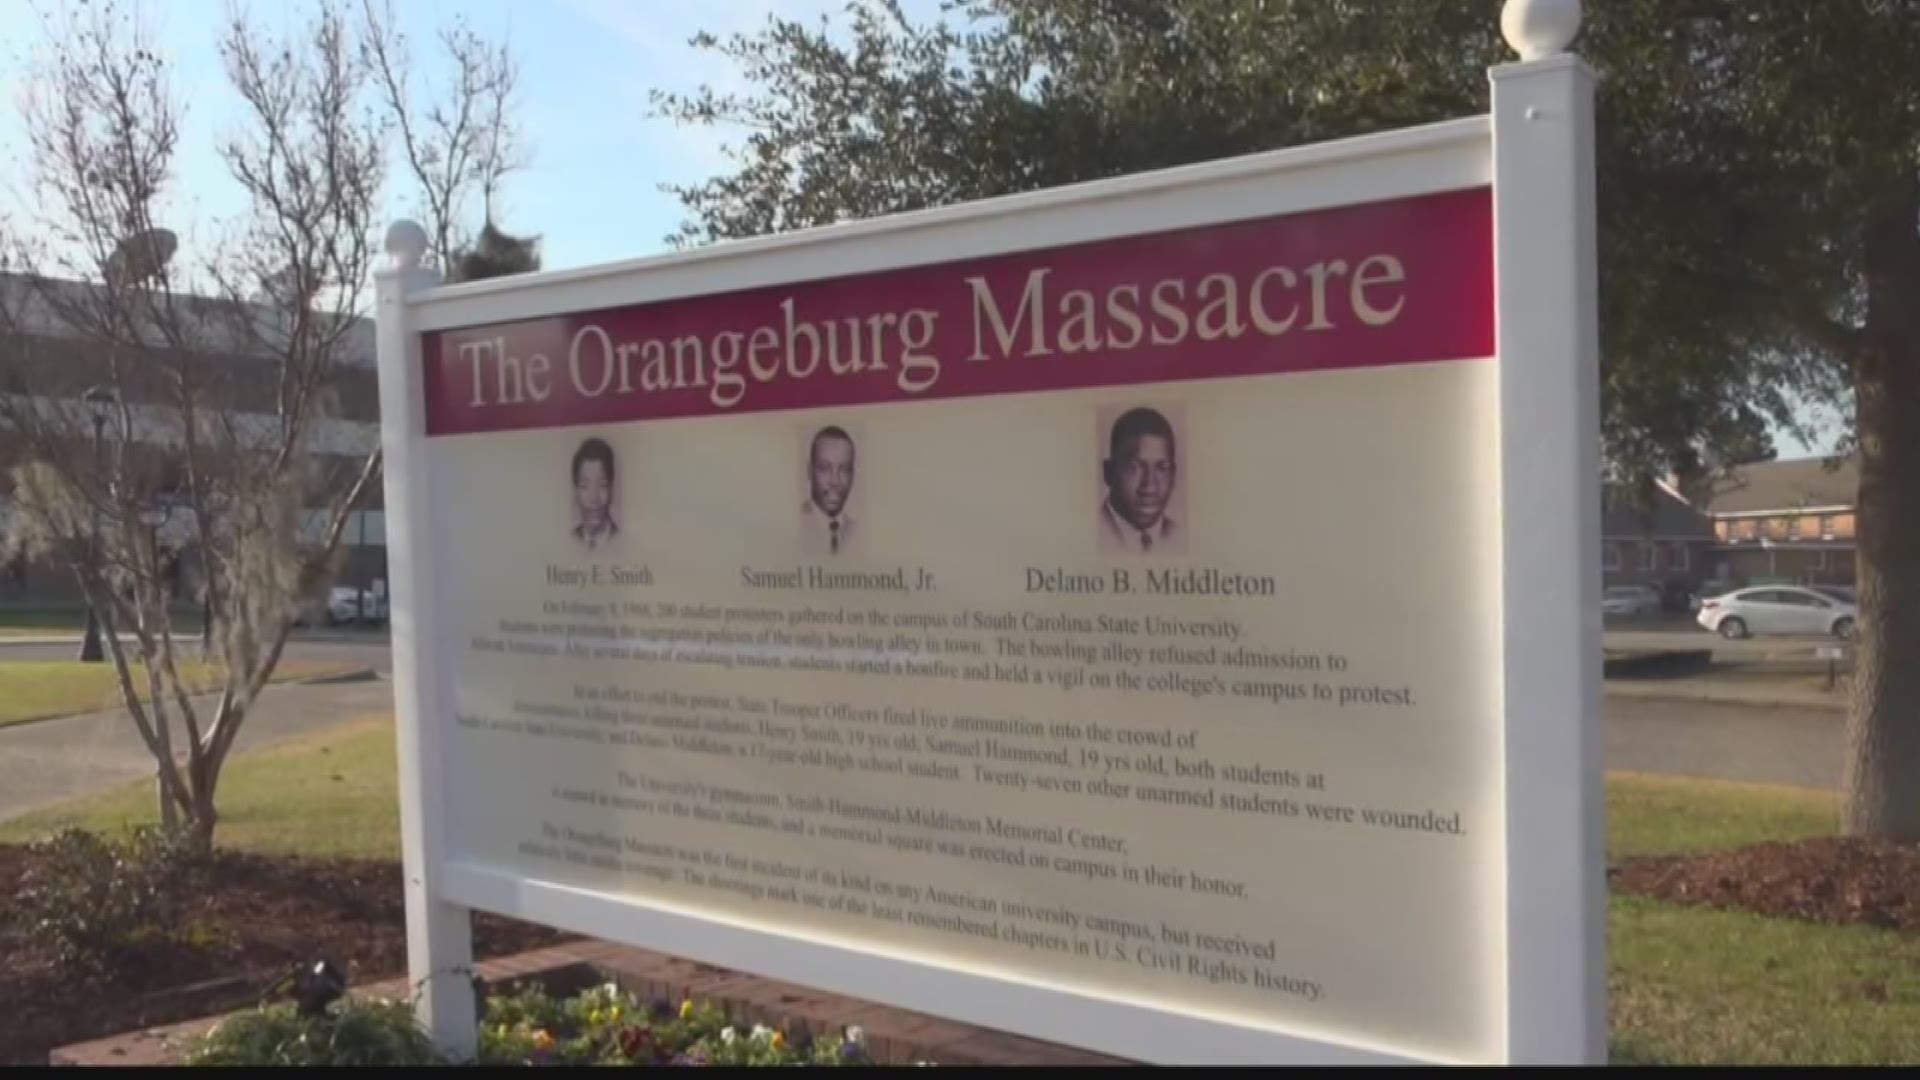 SC State campus will commemorate the 52nd year since the Orangeburg Massacre on Saturday